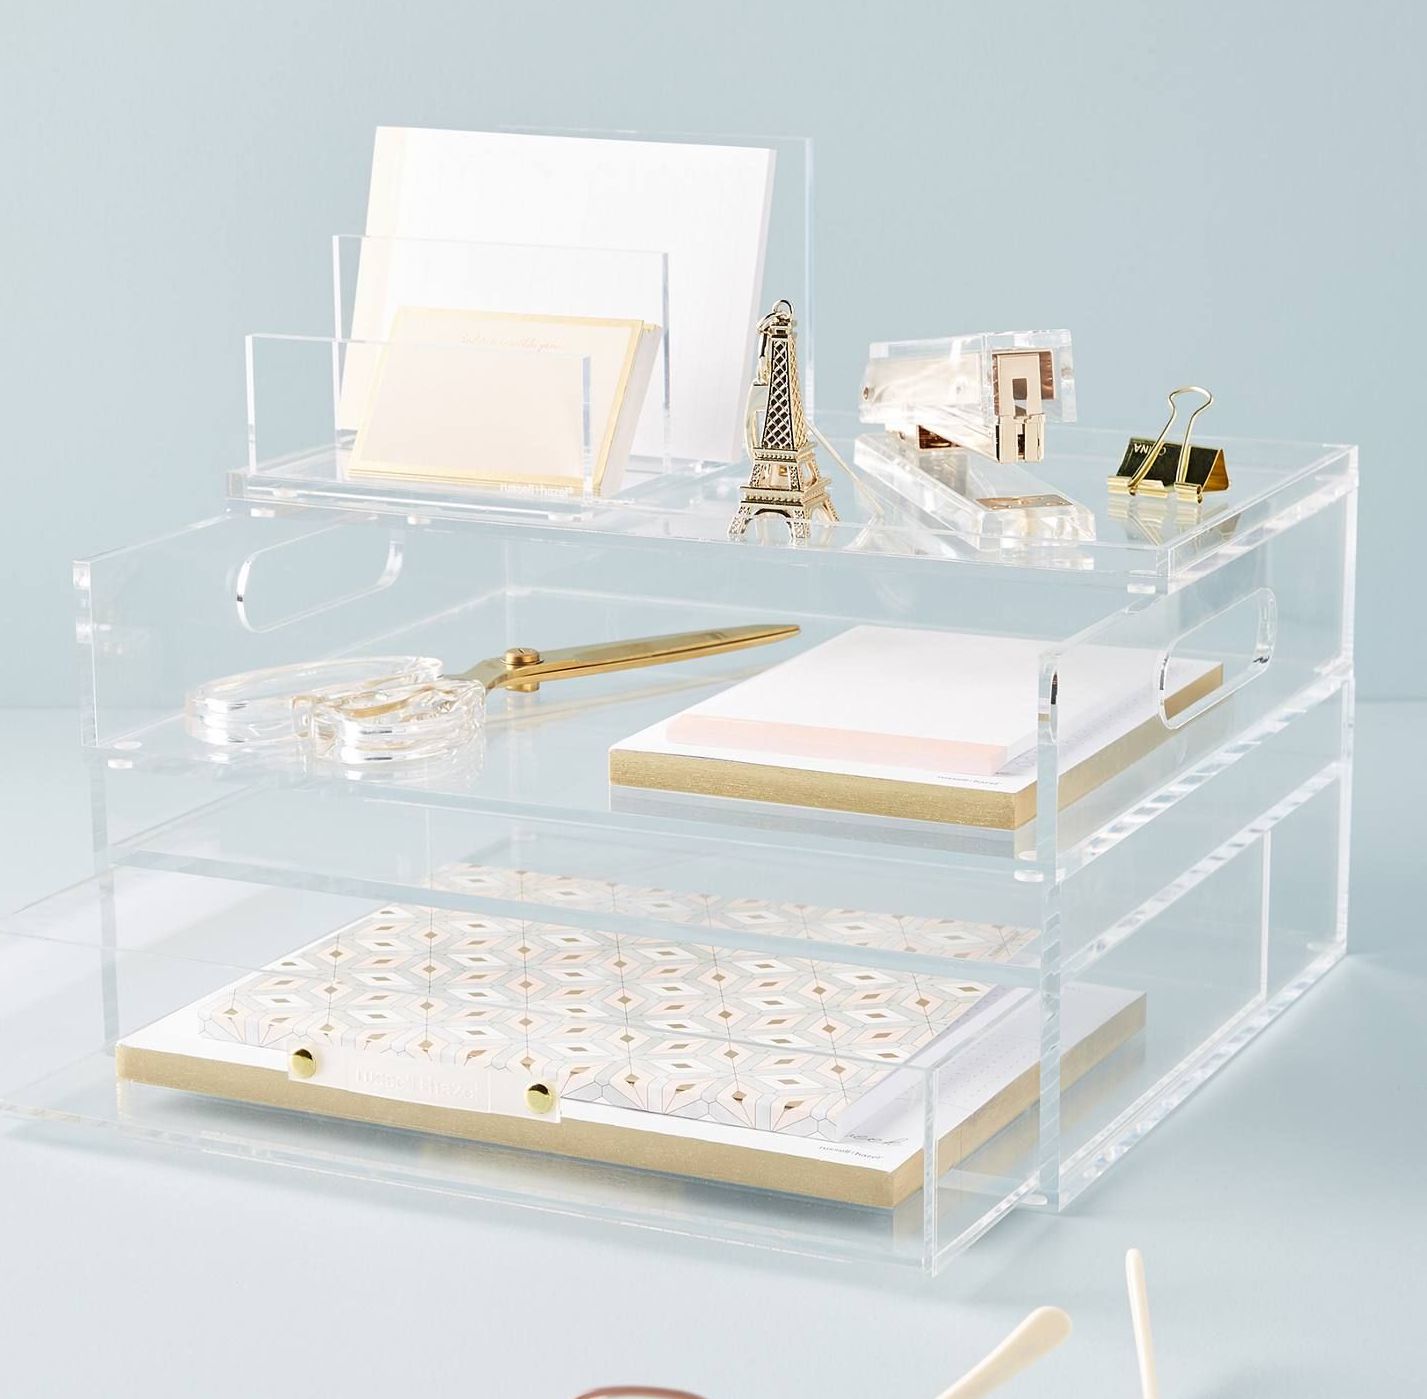 Top 20 Cool Desk Accessories for Graphic Design Lovers